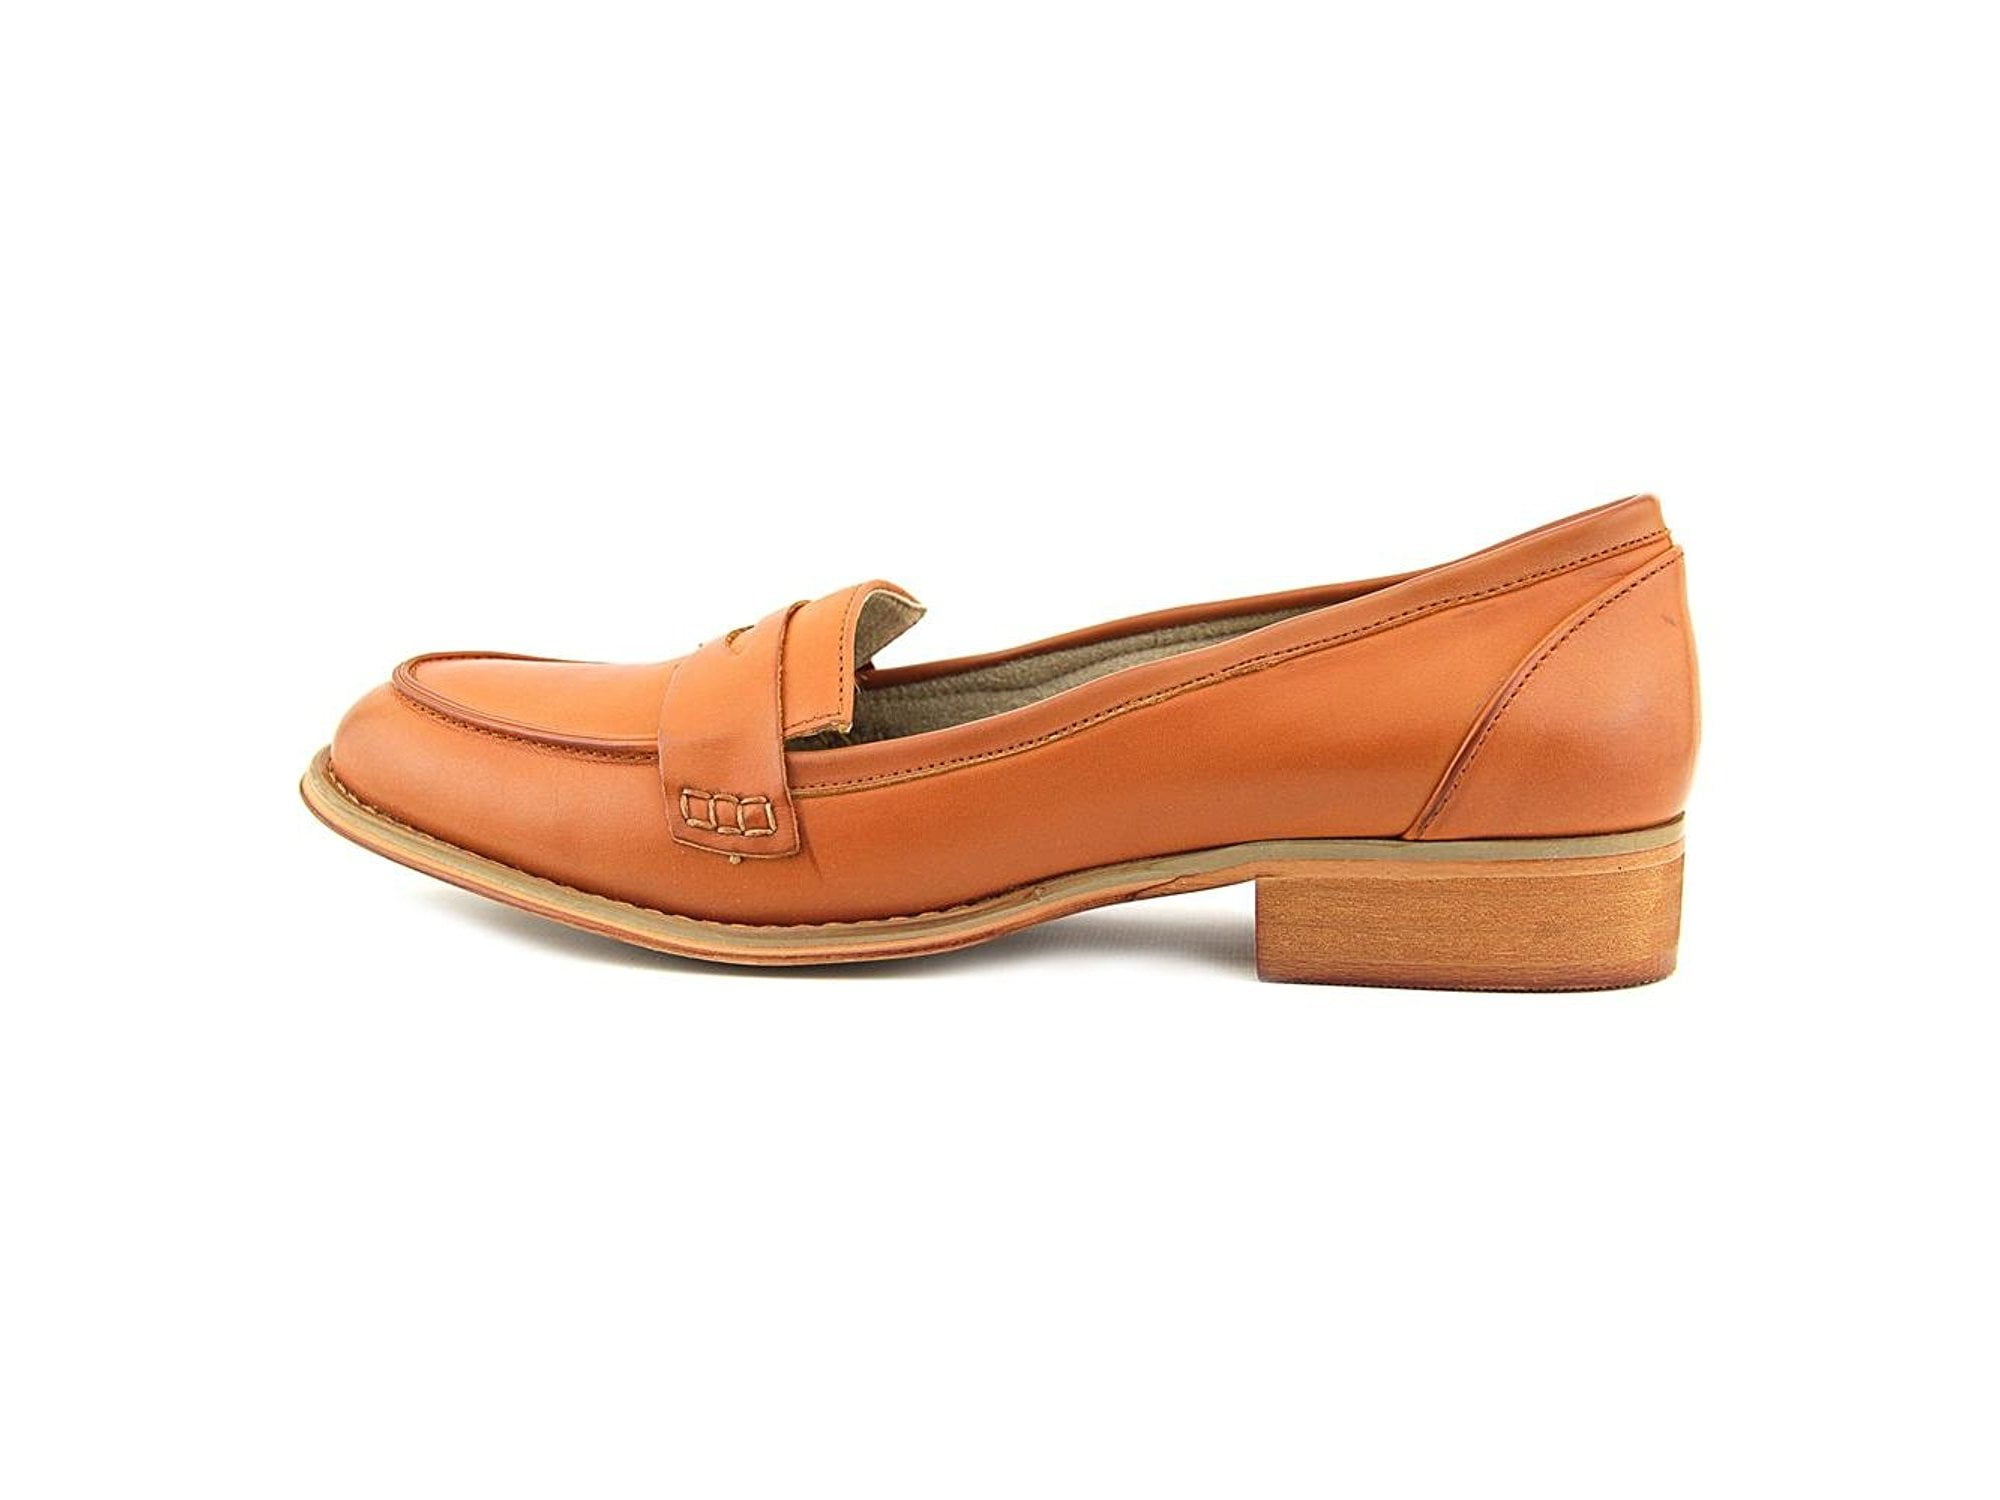 campus loafer shoes